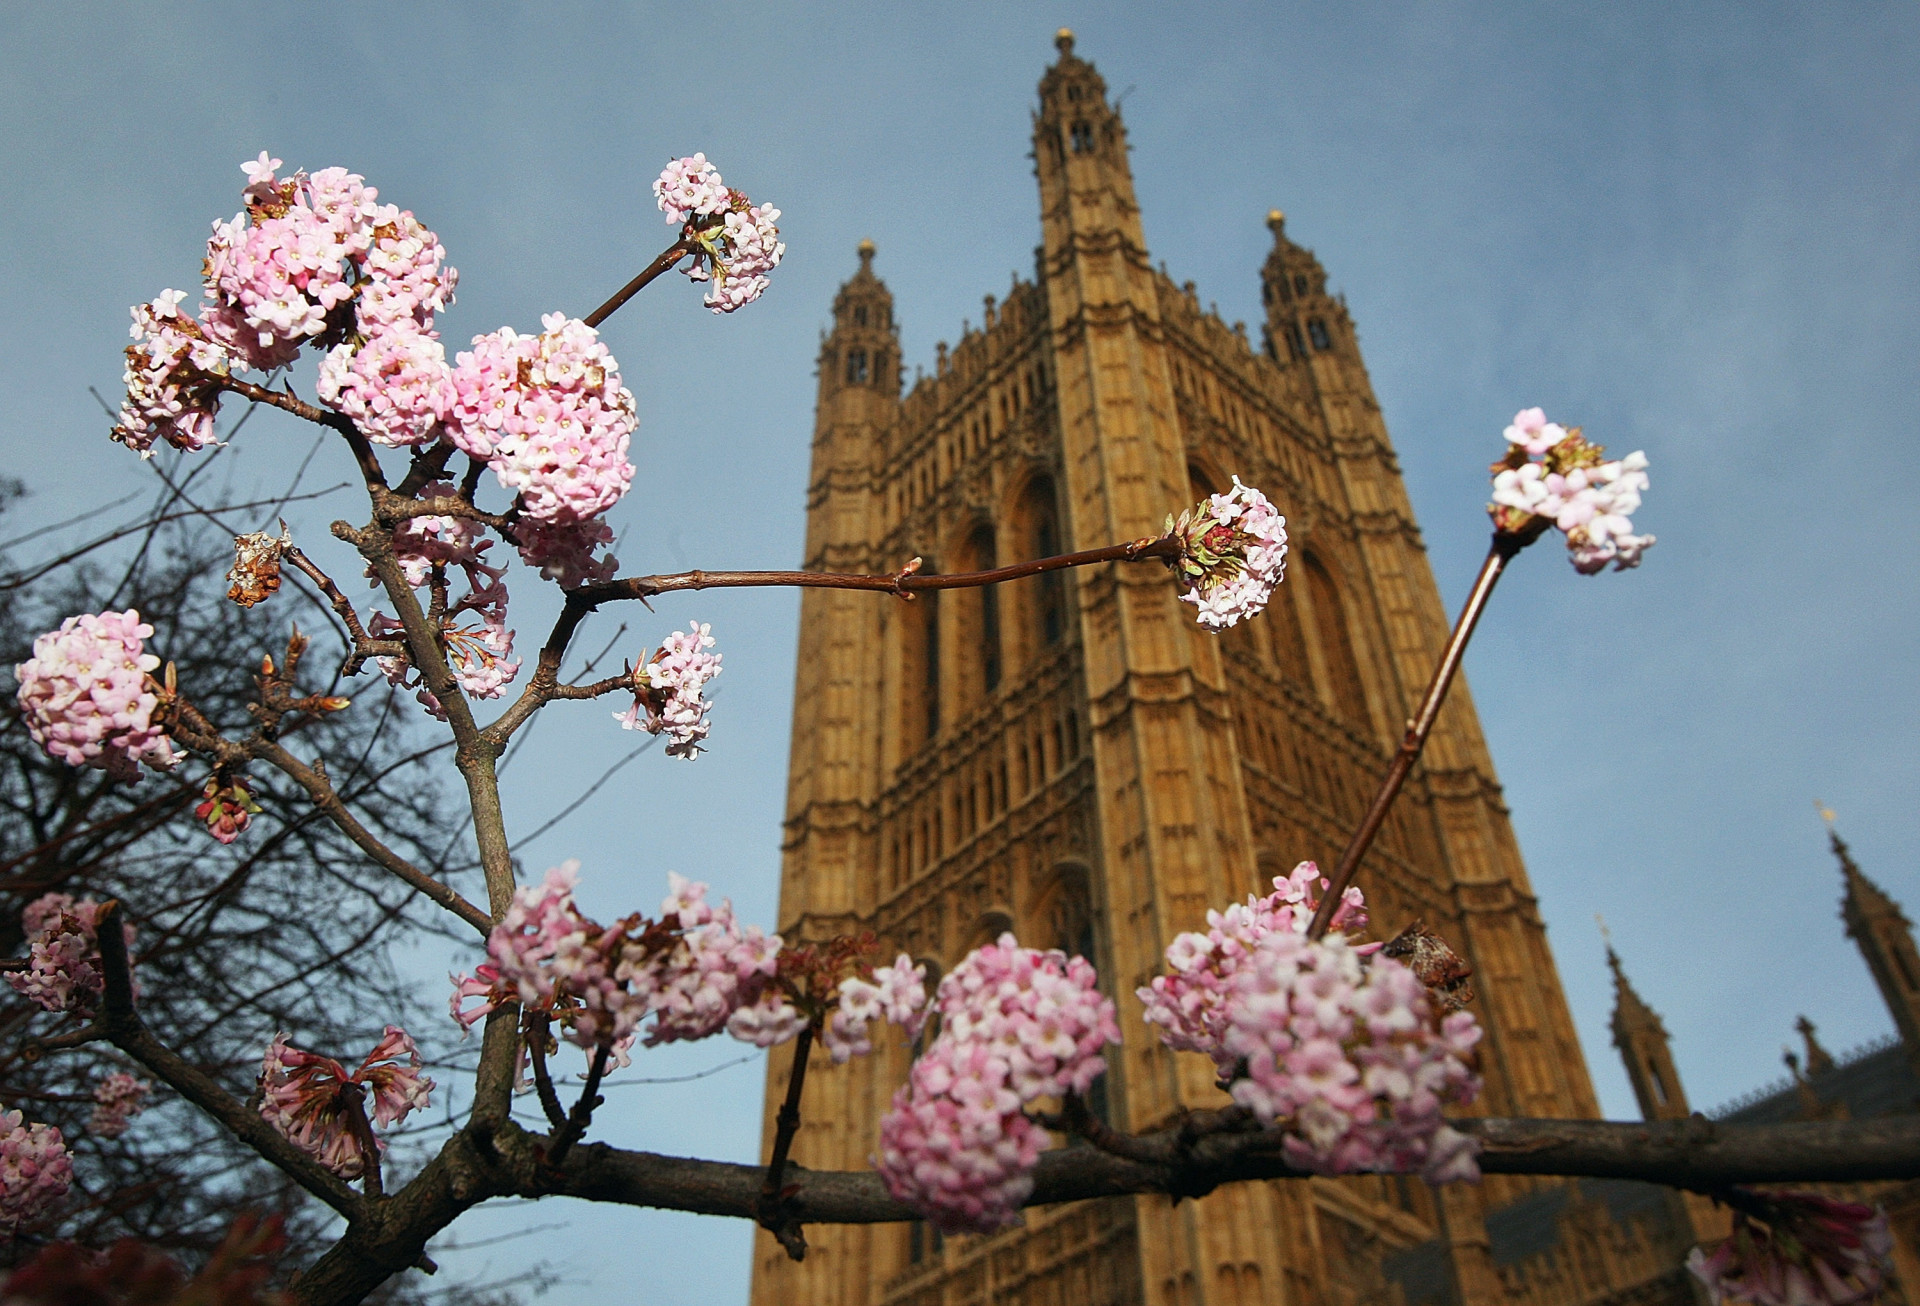 On the grounds in and around the Houses of Parliament lies an abundant display of Mount Fuji Blossoms, Weeping Cherries, and Camellias among other trees and shrubs. <p><a href="https://www.msn.com/en-us/community/channel/vid-7xx8mnucu55yw63we9va2gwr7uihbxwc68fxqp25x6tg4ftibpra?cvid=94631541bc0f4f89bfd59158d696ad7e">Follow us and access great exclusive content every day</a></p>